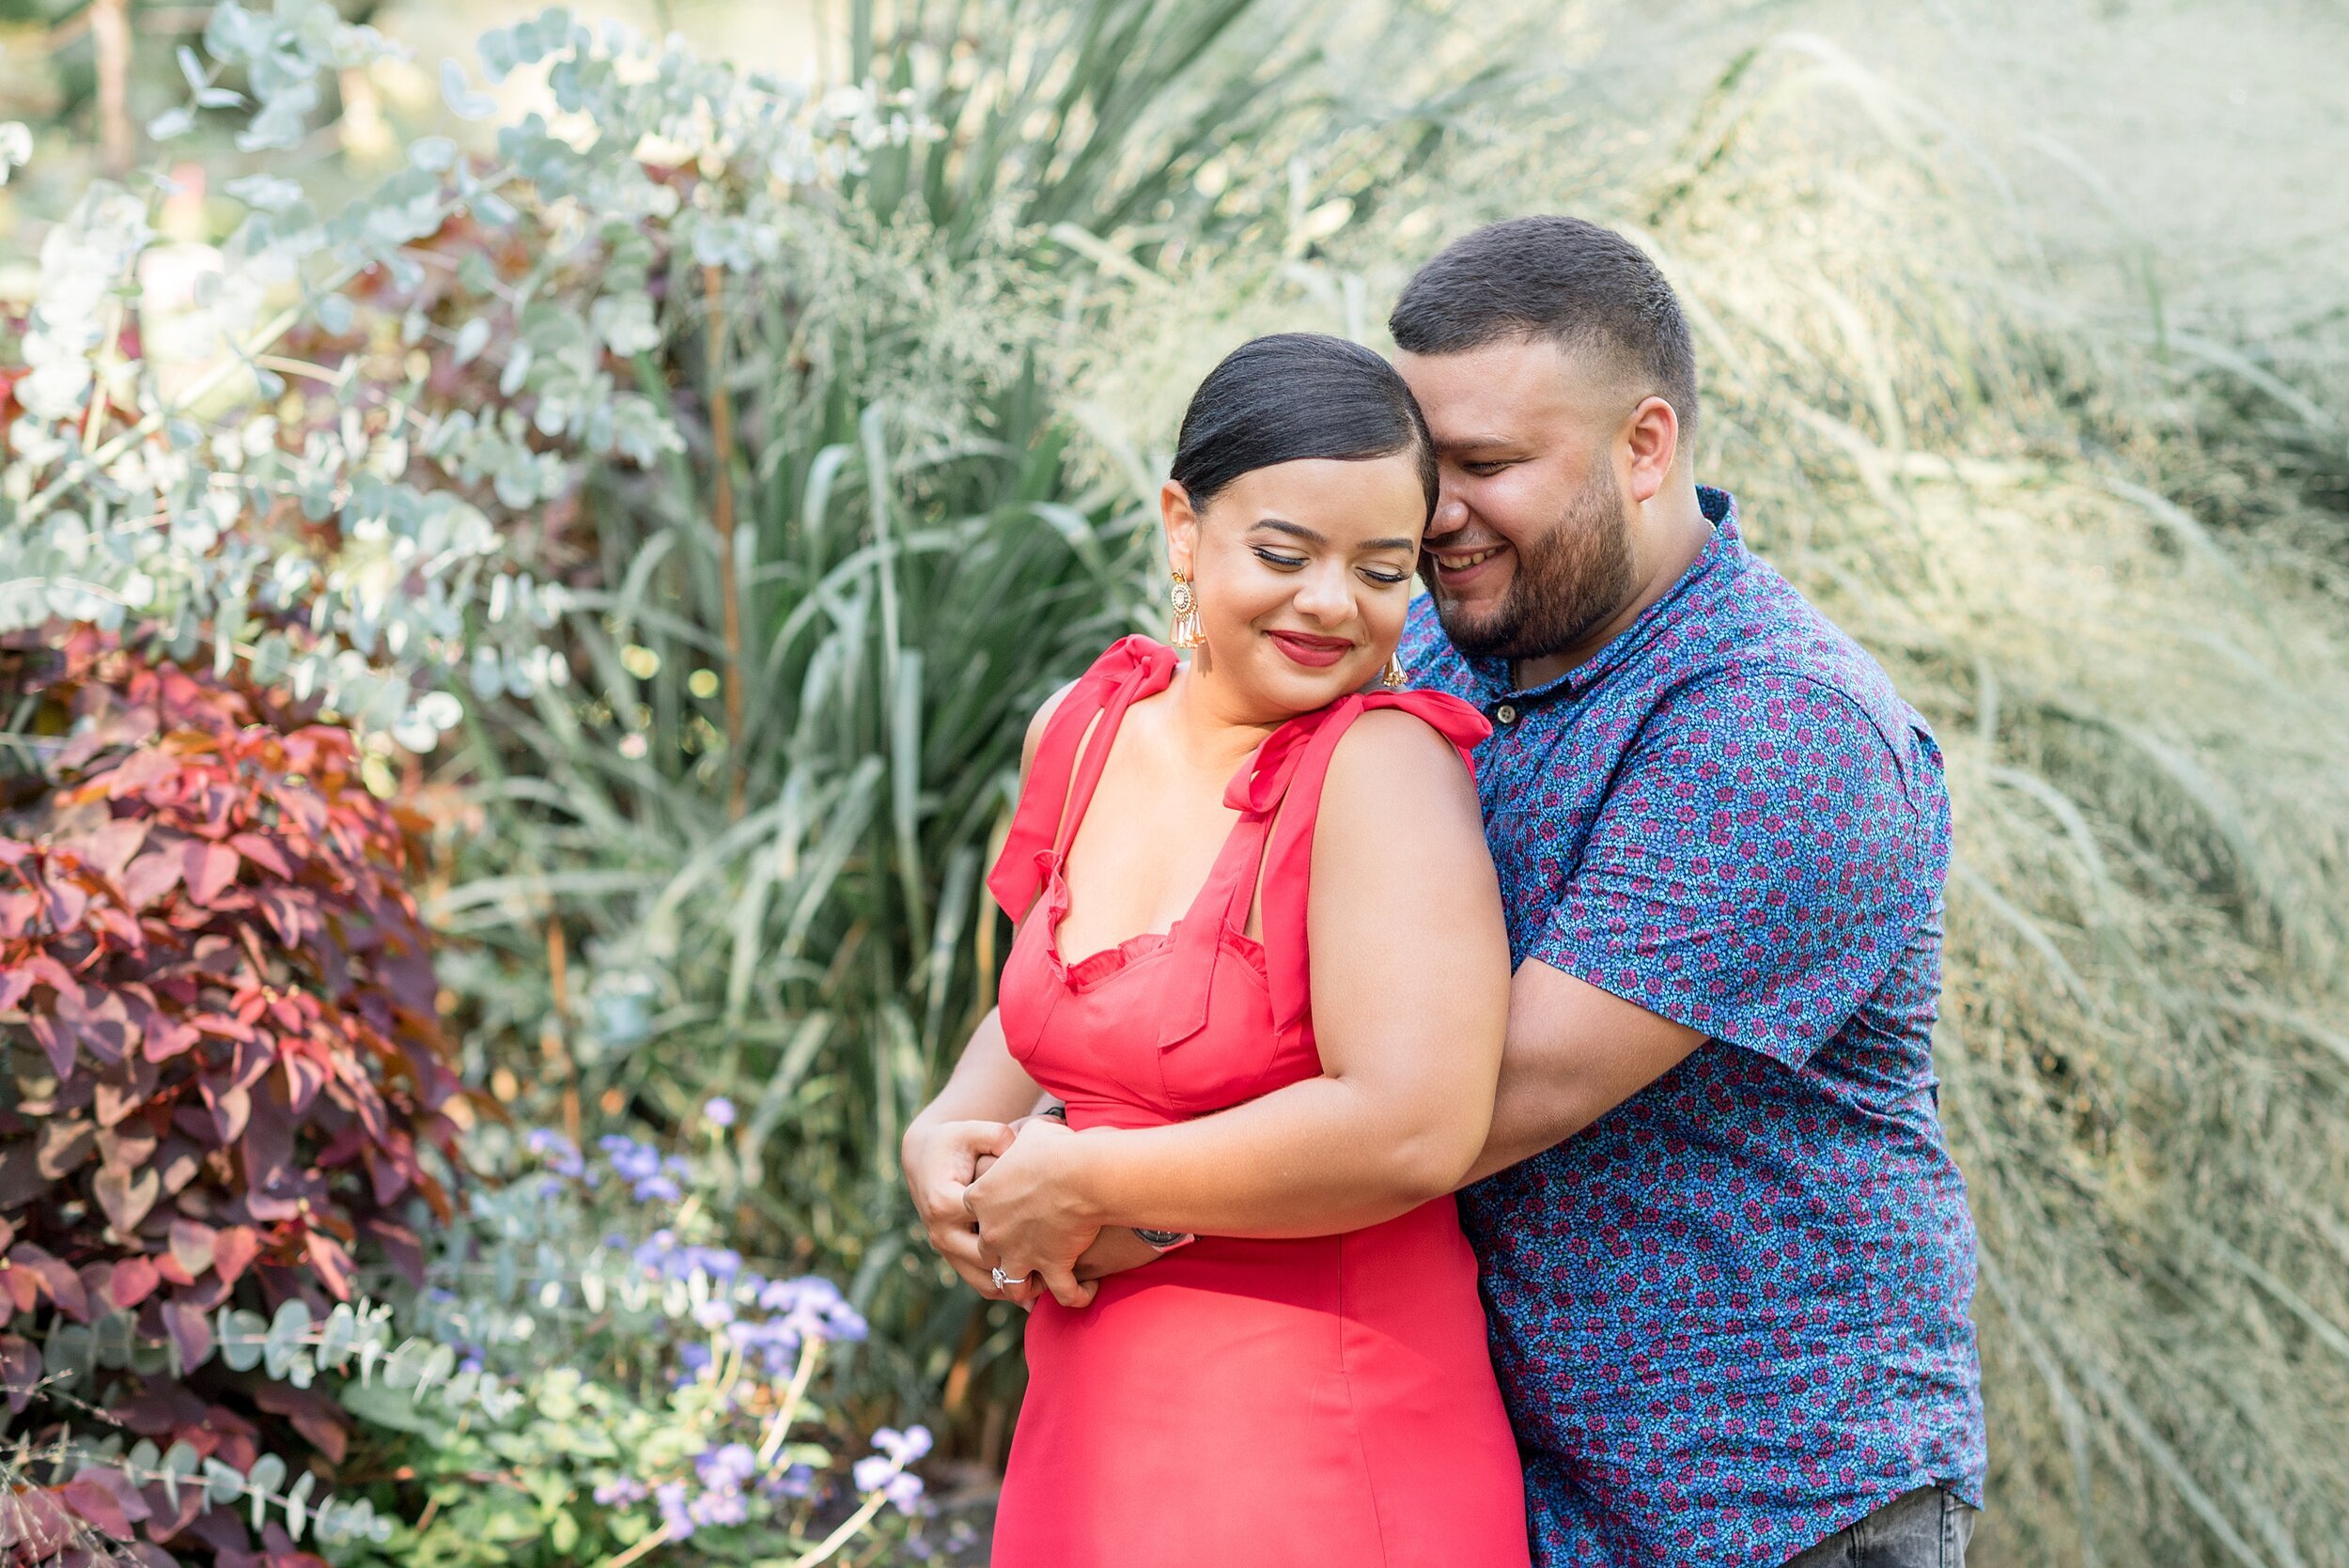 Longwood Gardens Kennet Square Pa Summer Engagement Session Photography_7686.jpg